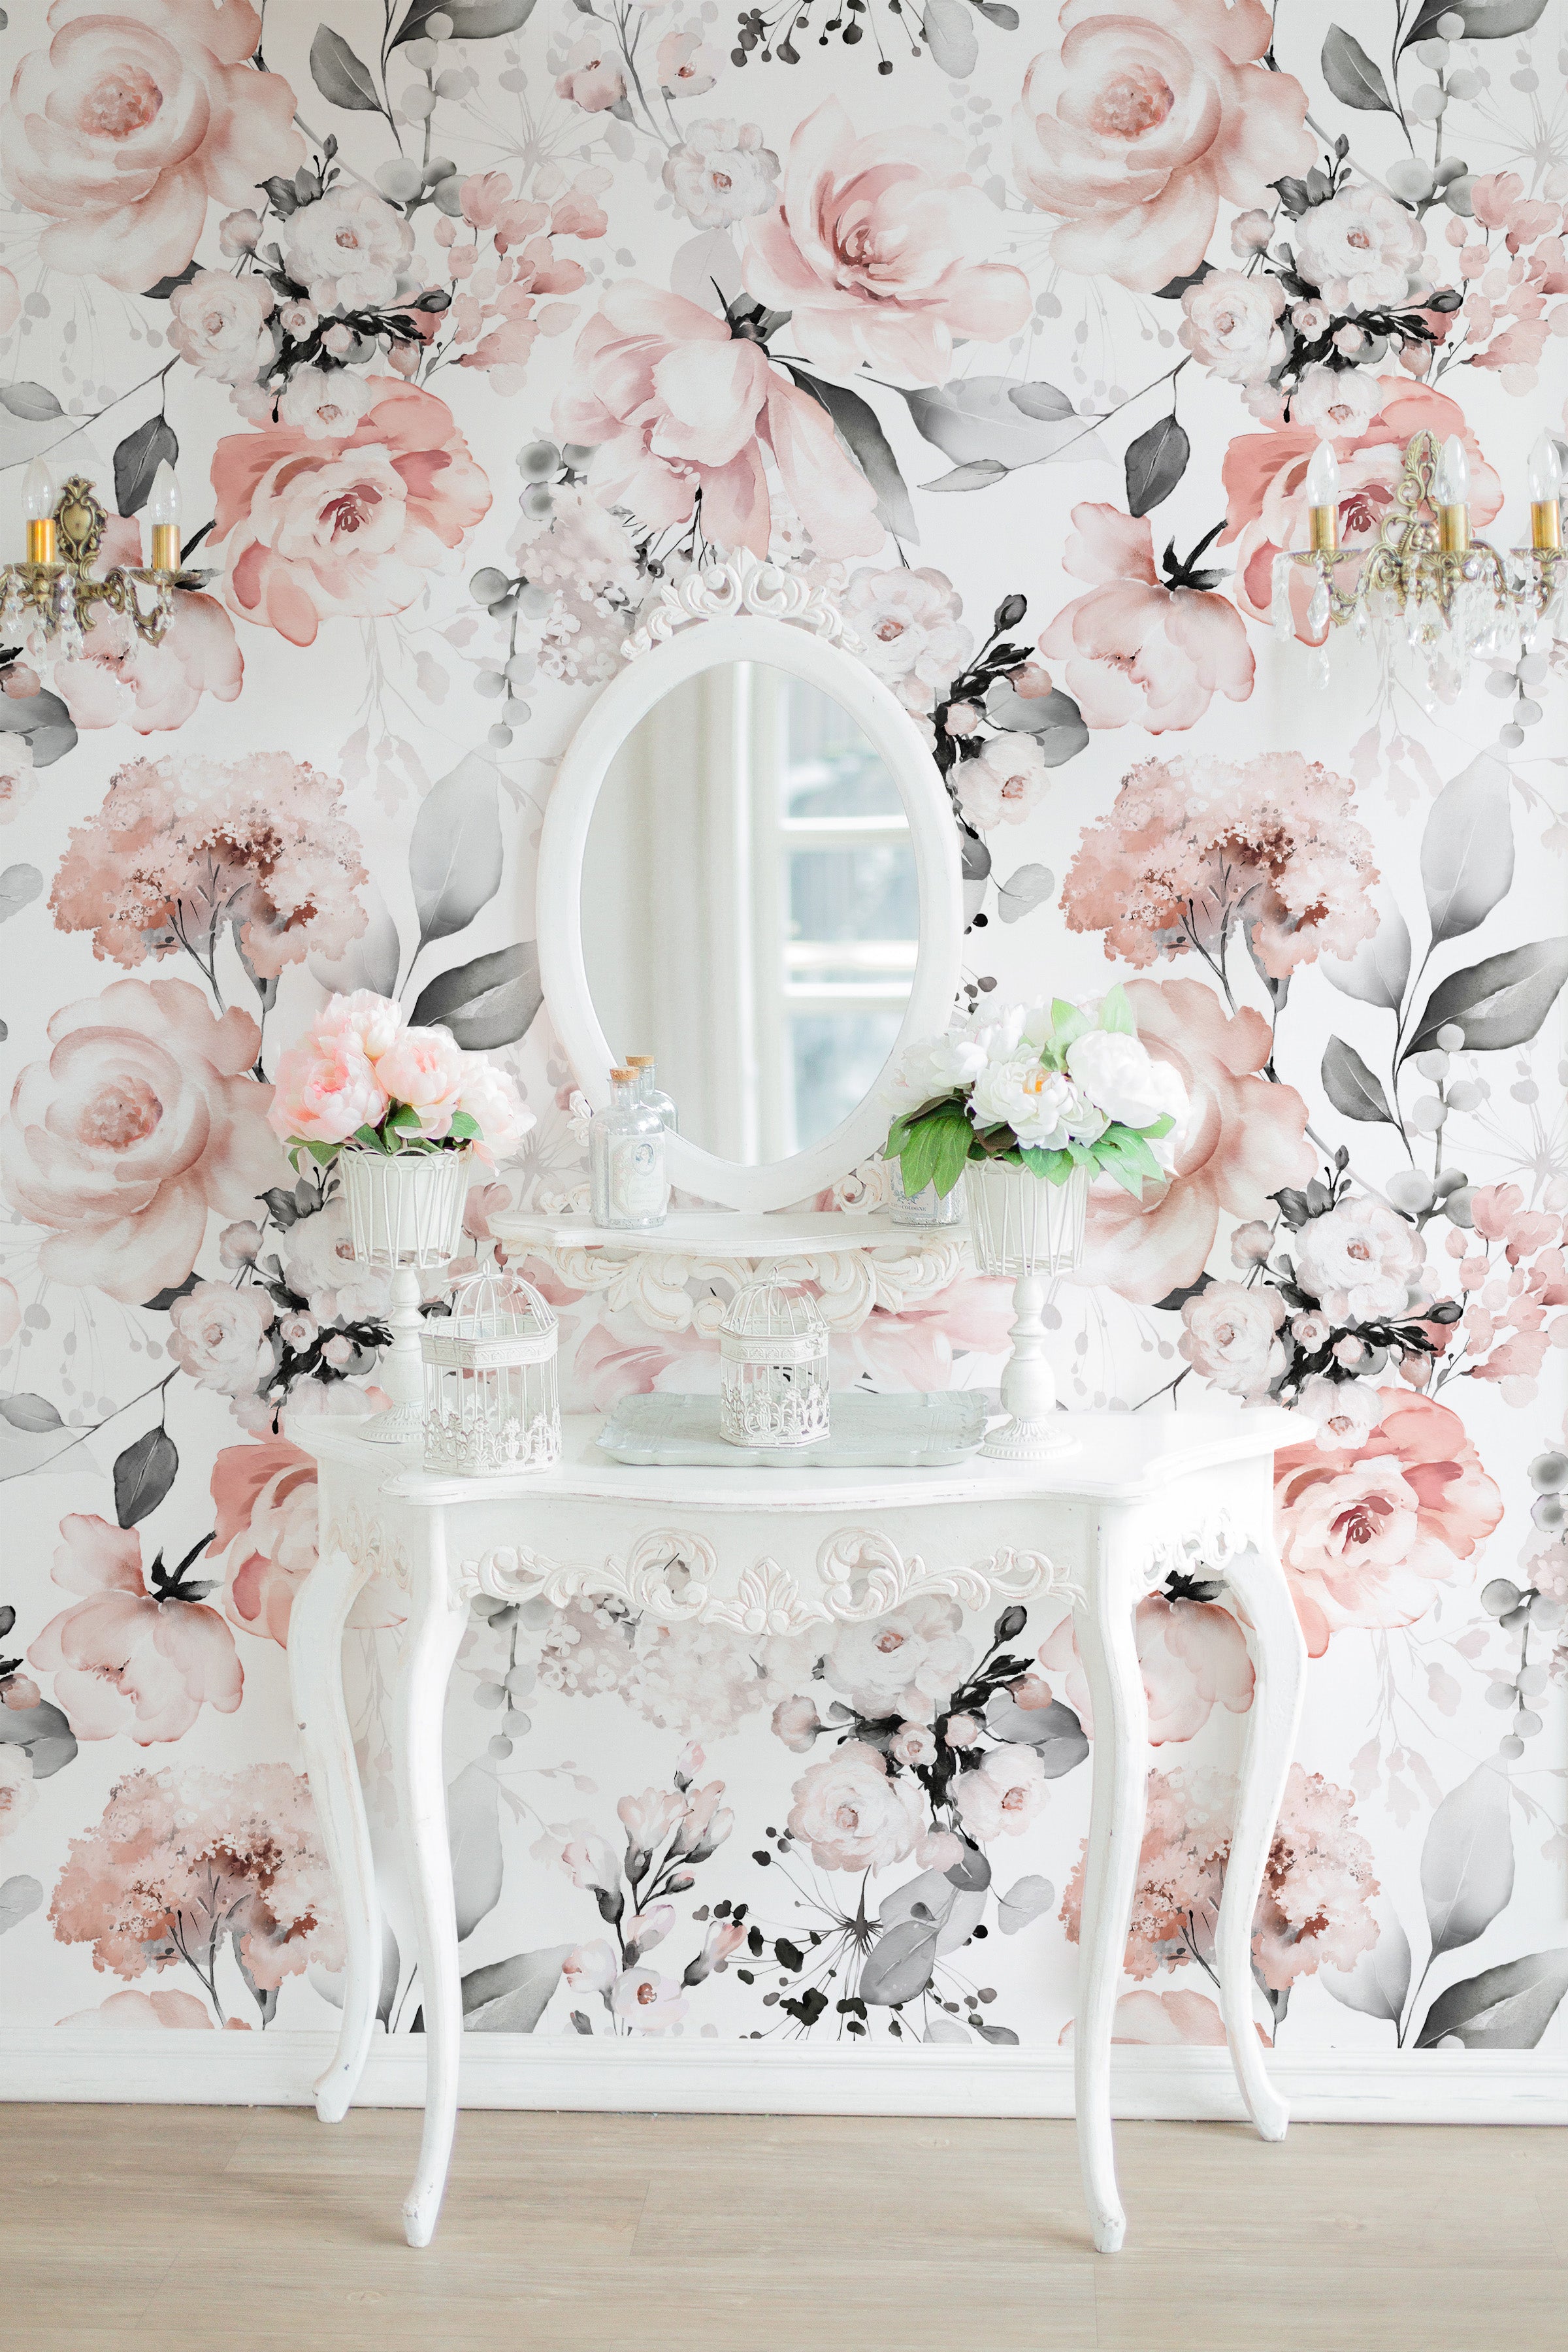 An elegant dressing area accentuated by the 'Floral and Herbs Wallpaper - Pink + Black - 50"', with a classic white vanity table and mirror. The surrounding floral wallpaper with large pink blooms and dark herbal accents creates a charming and feminine backdrop that enhances the room's sophistication.